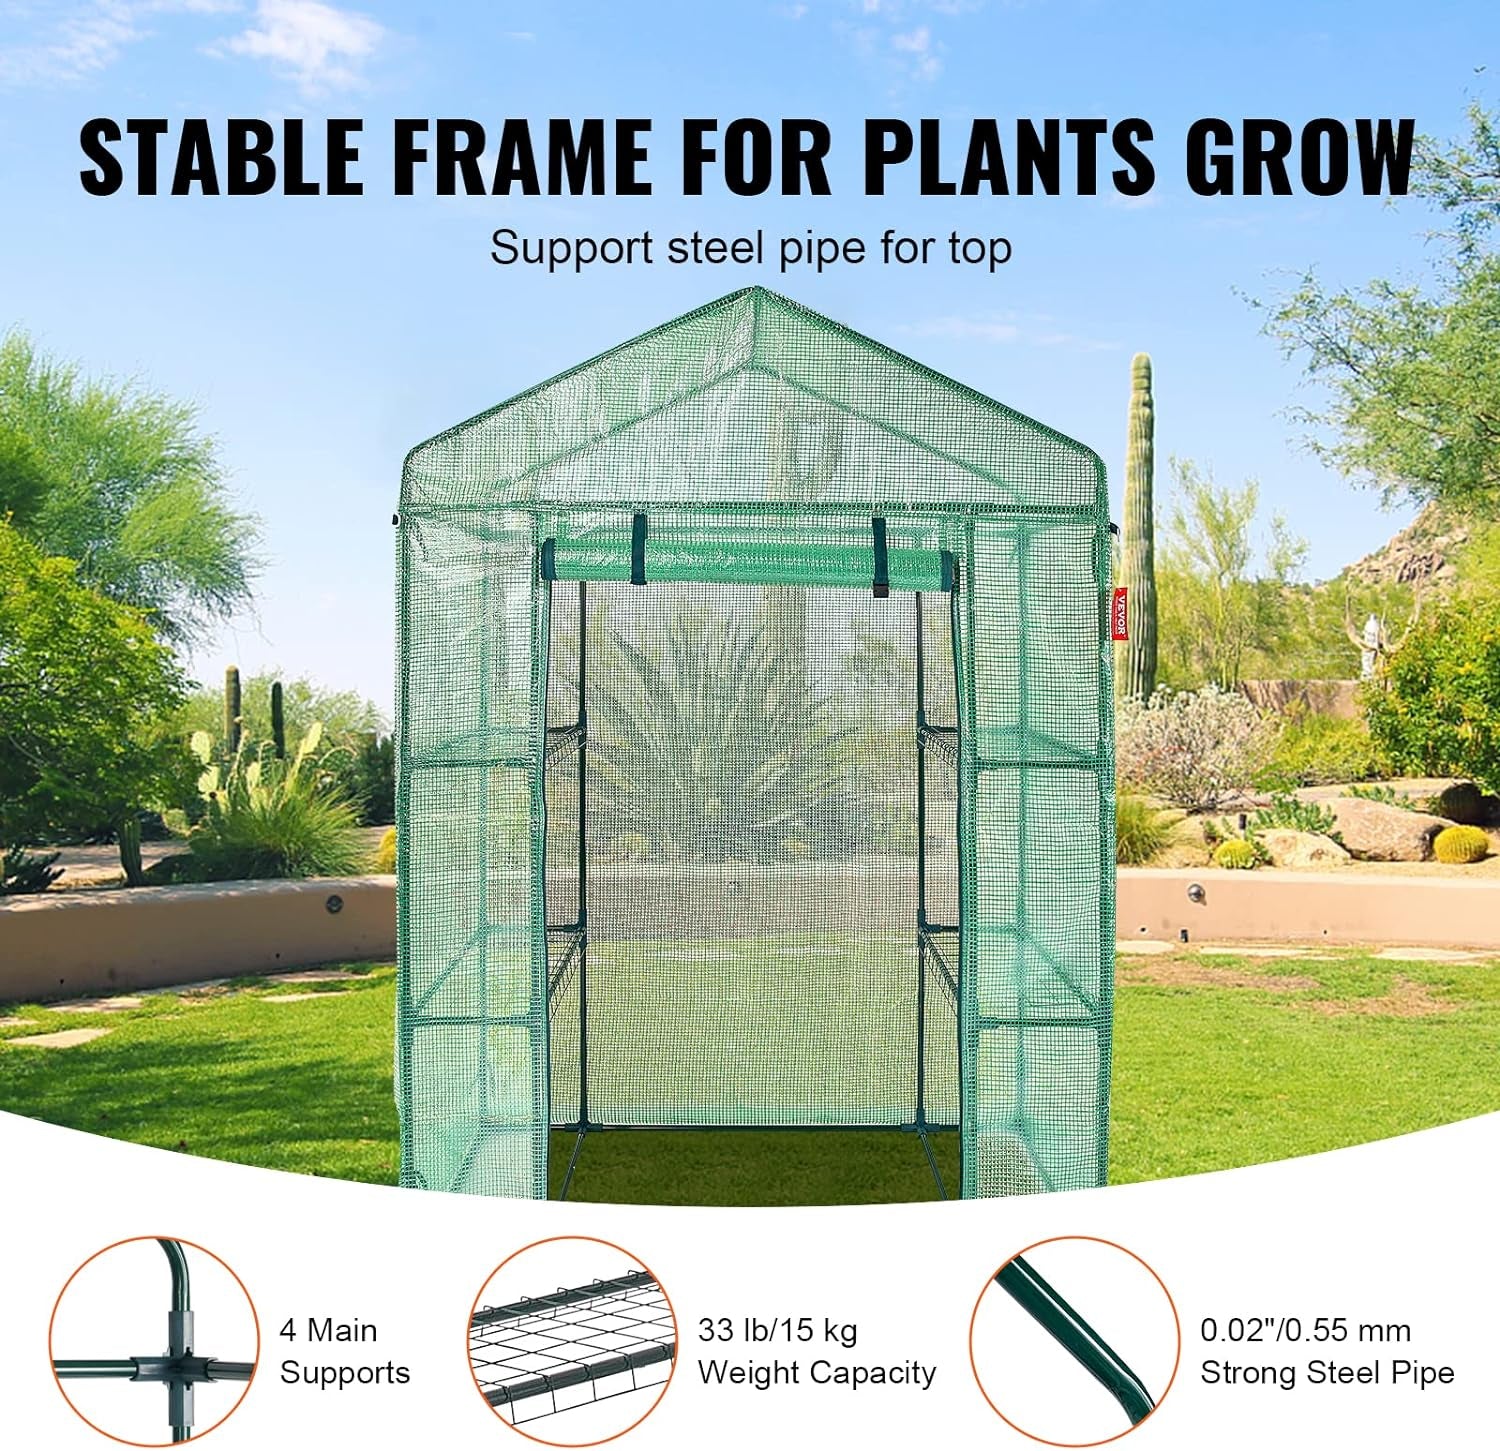 Walk-In Green House, 55.5 X 29.3 X 80.7 Inch, Portable Greenhouse with Shelves, High Strength PE Cover with Roll-Up Zipper Door and Steel Frame, Set up in Minutes, for Planting and Storage - Design By Technique